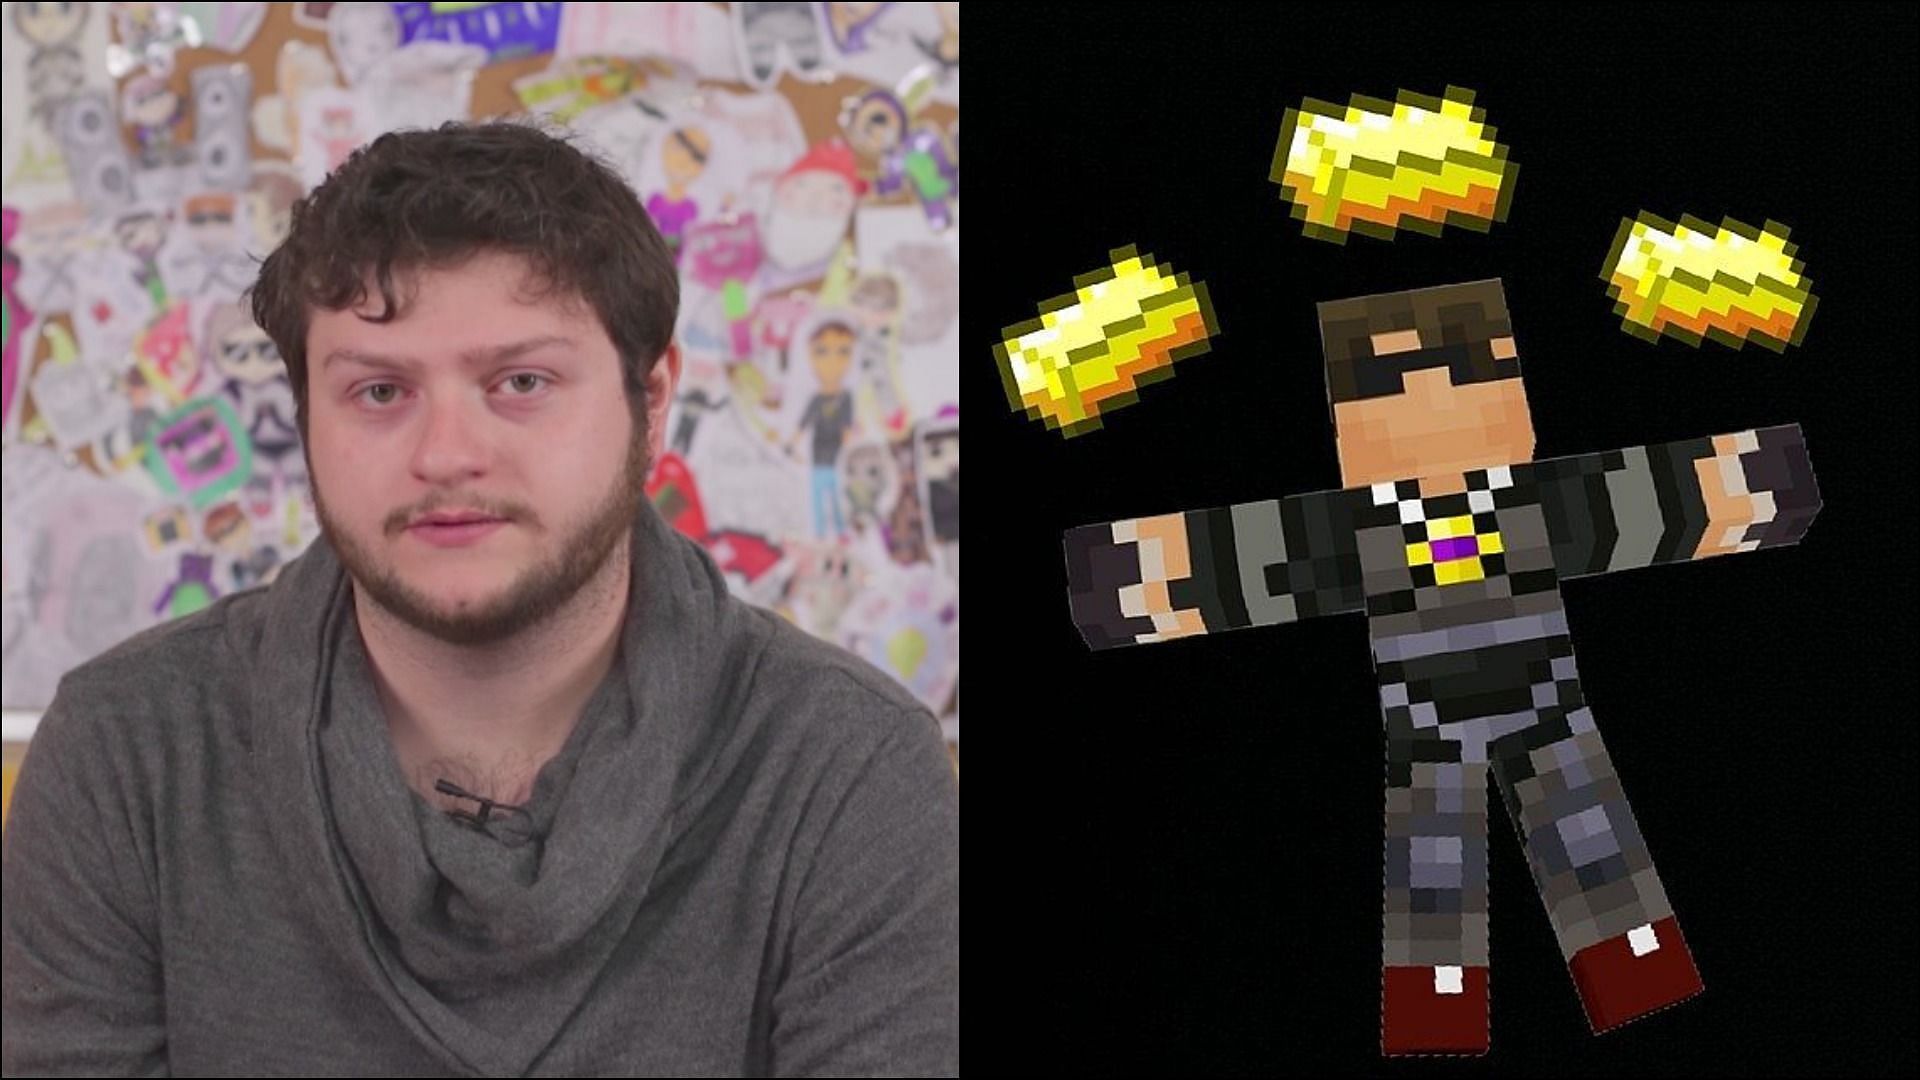 Fans of SkyDoesMinecraft react to abuse allegations - Verve times